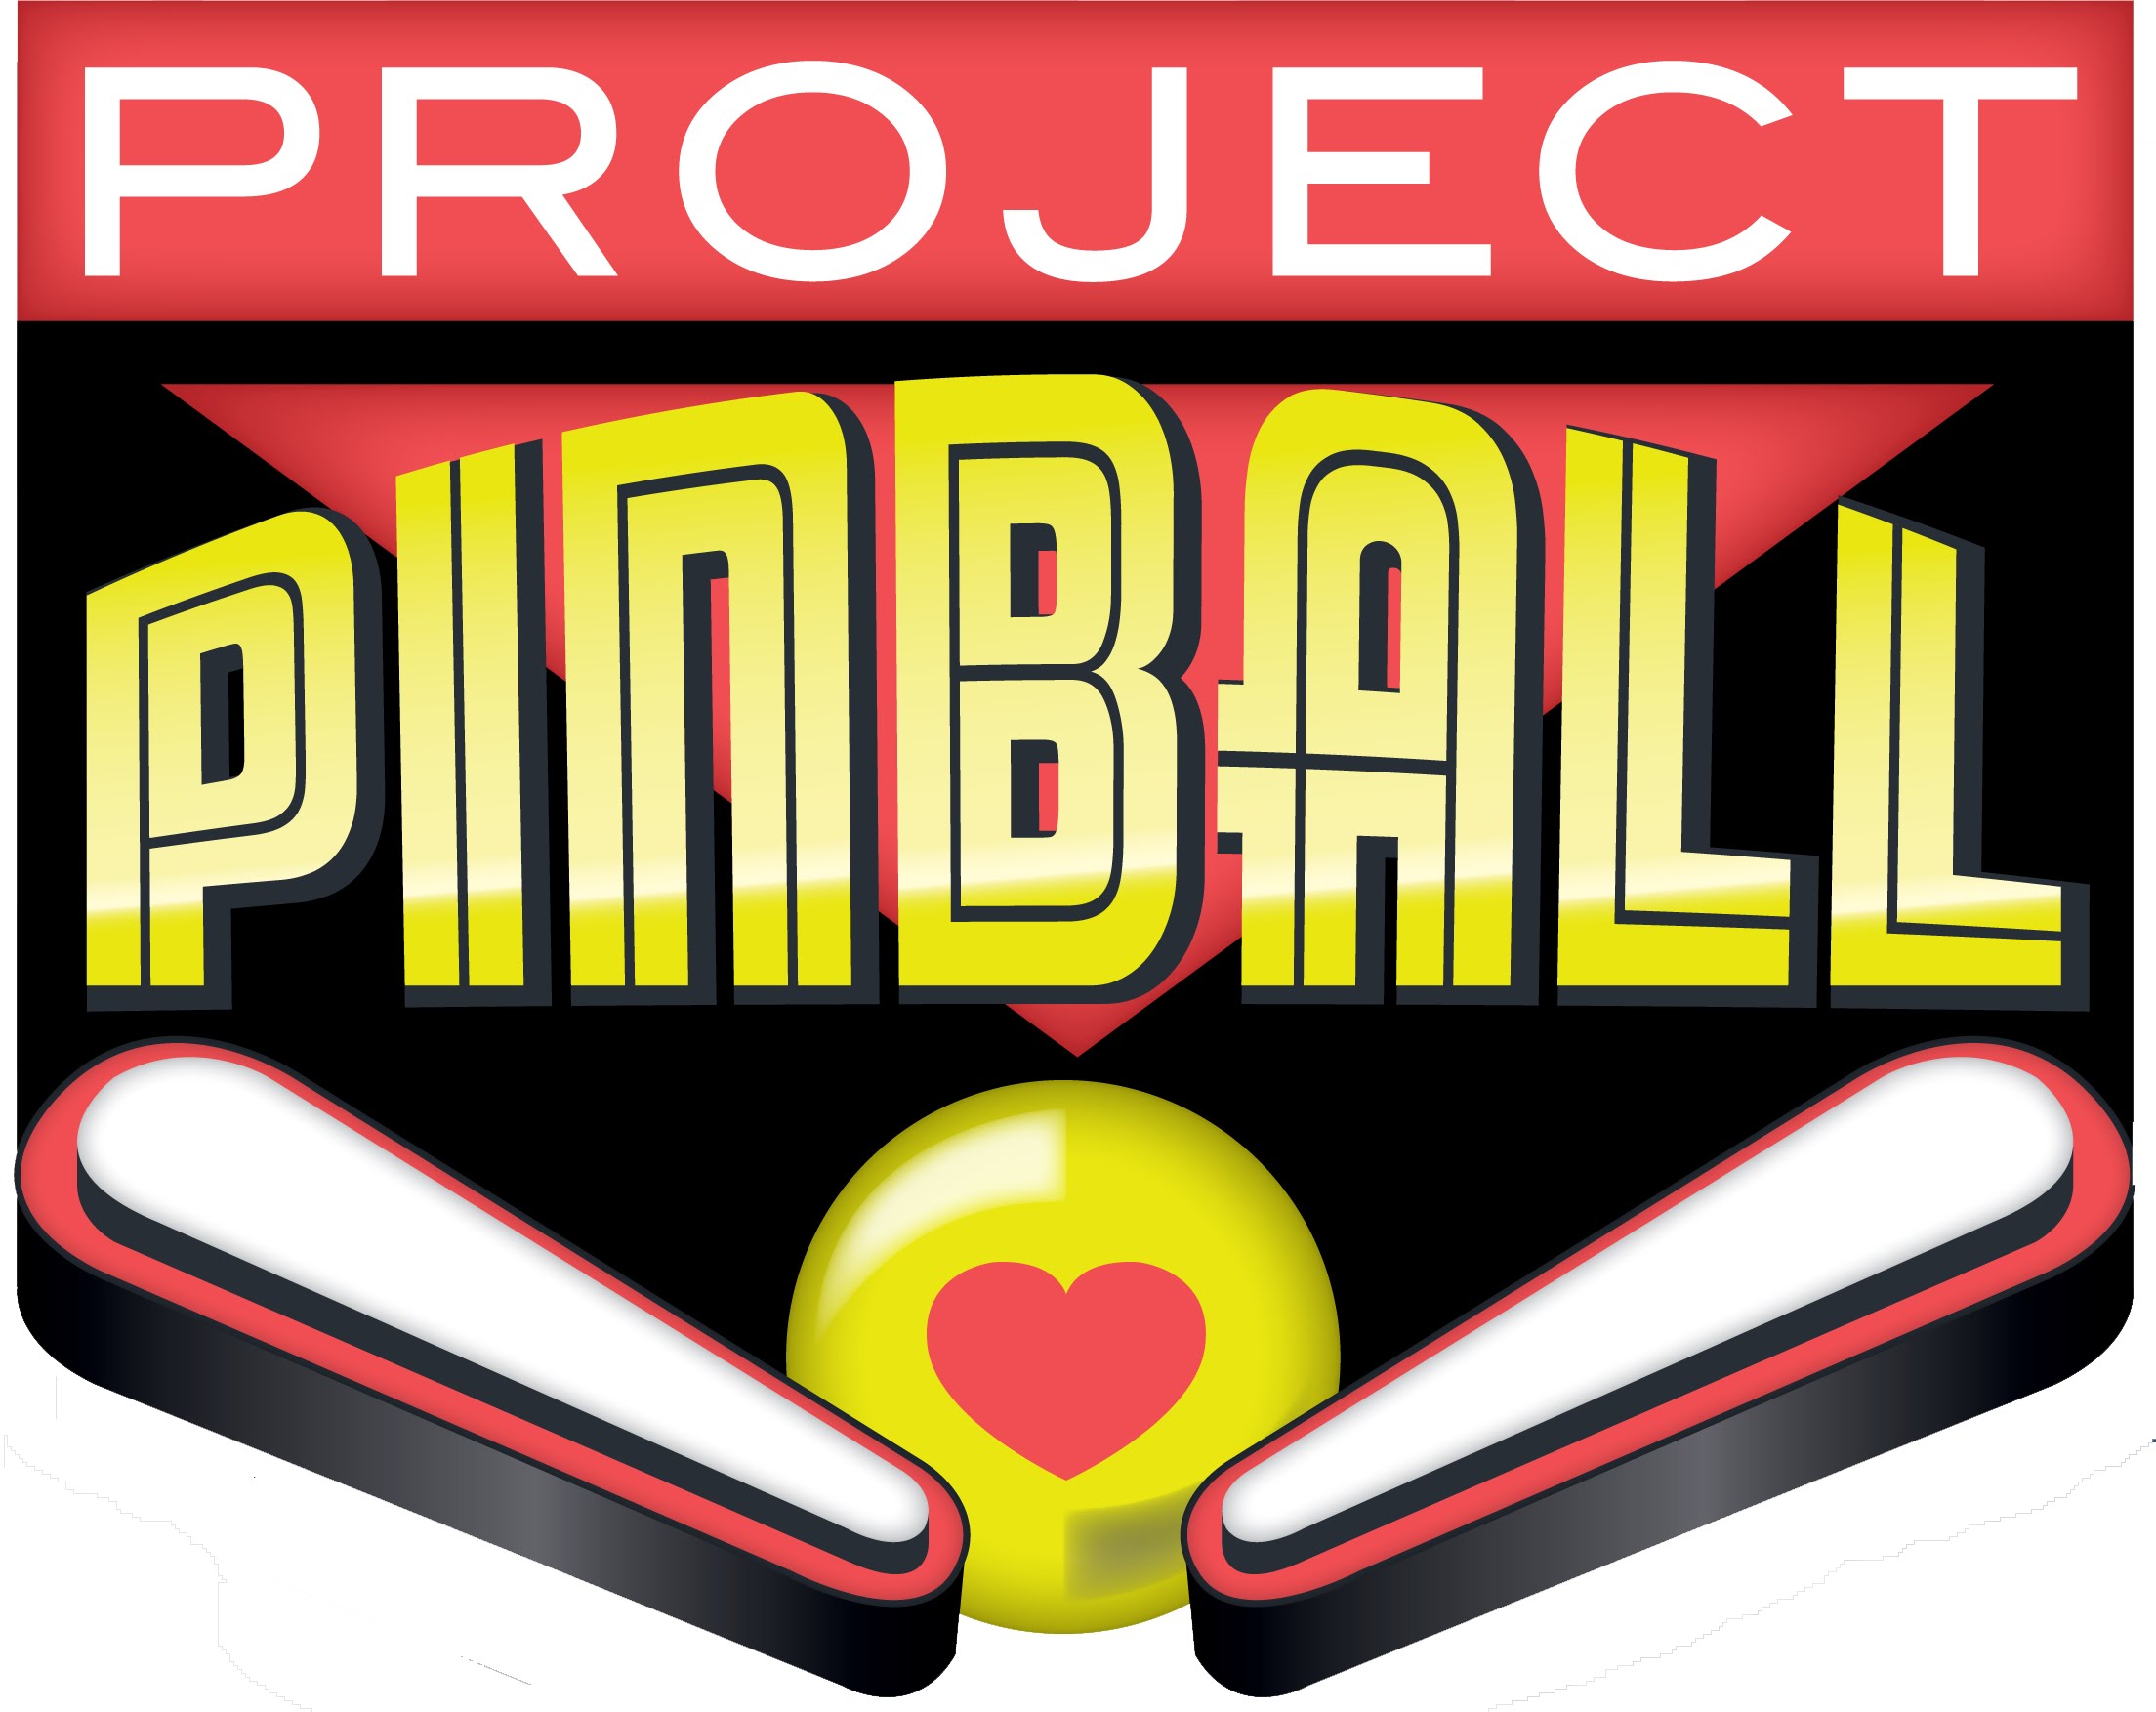 Project Pinball – Call to Action